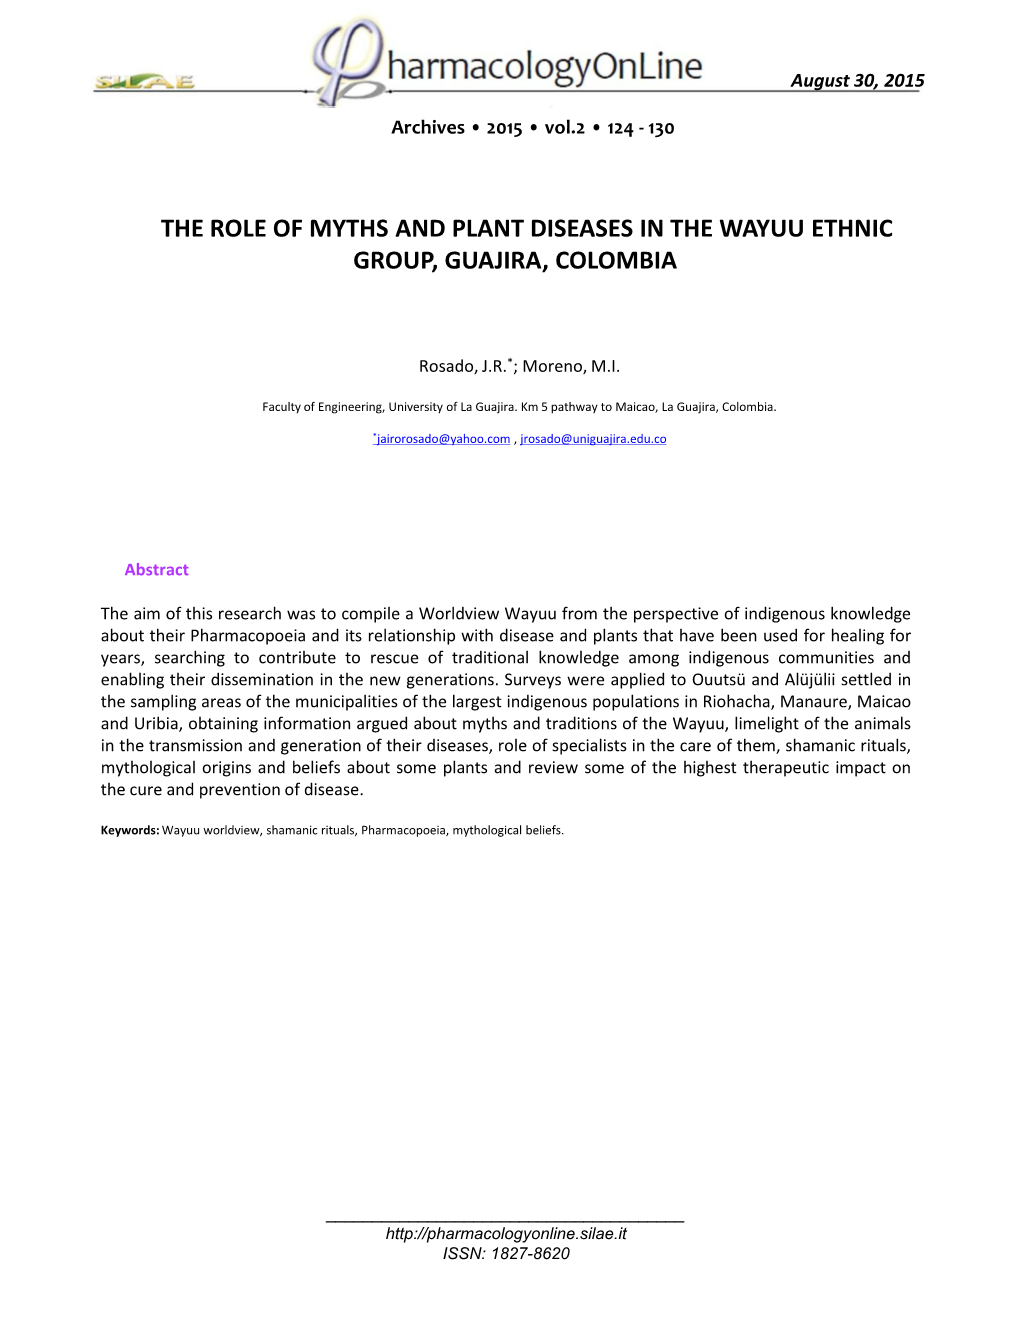 The Role of Myths and Plant Diseases in the Wayuu Ethnic Group, Guajira, Colombia